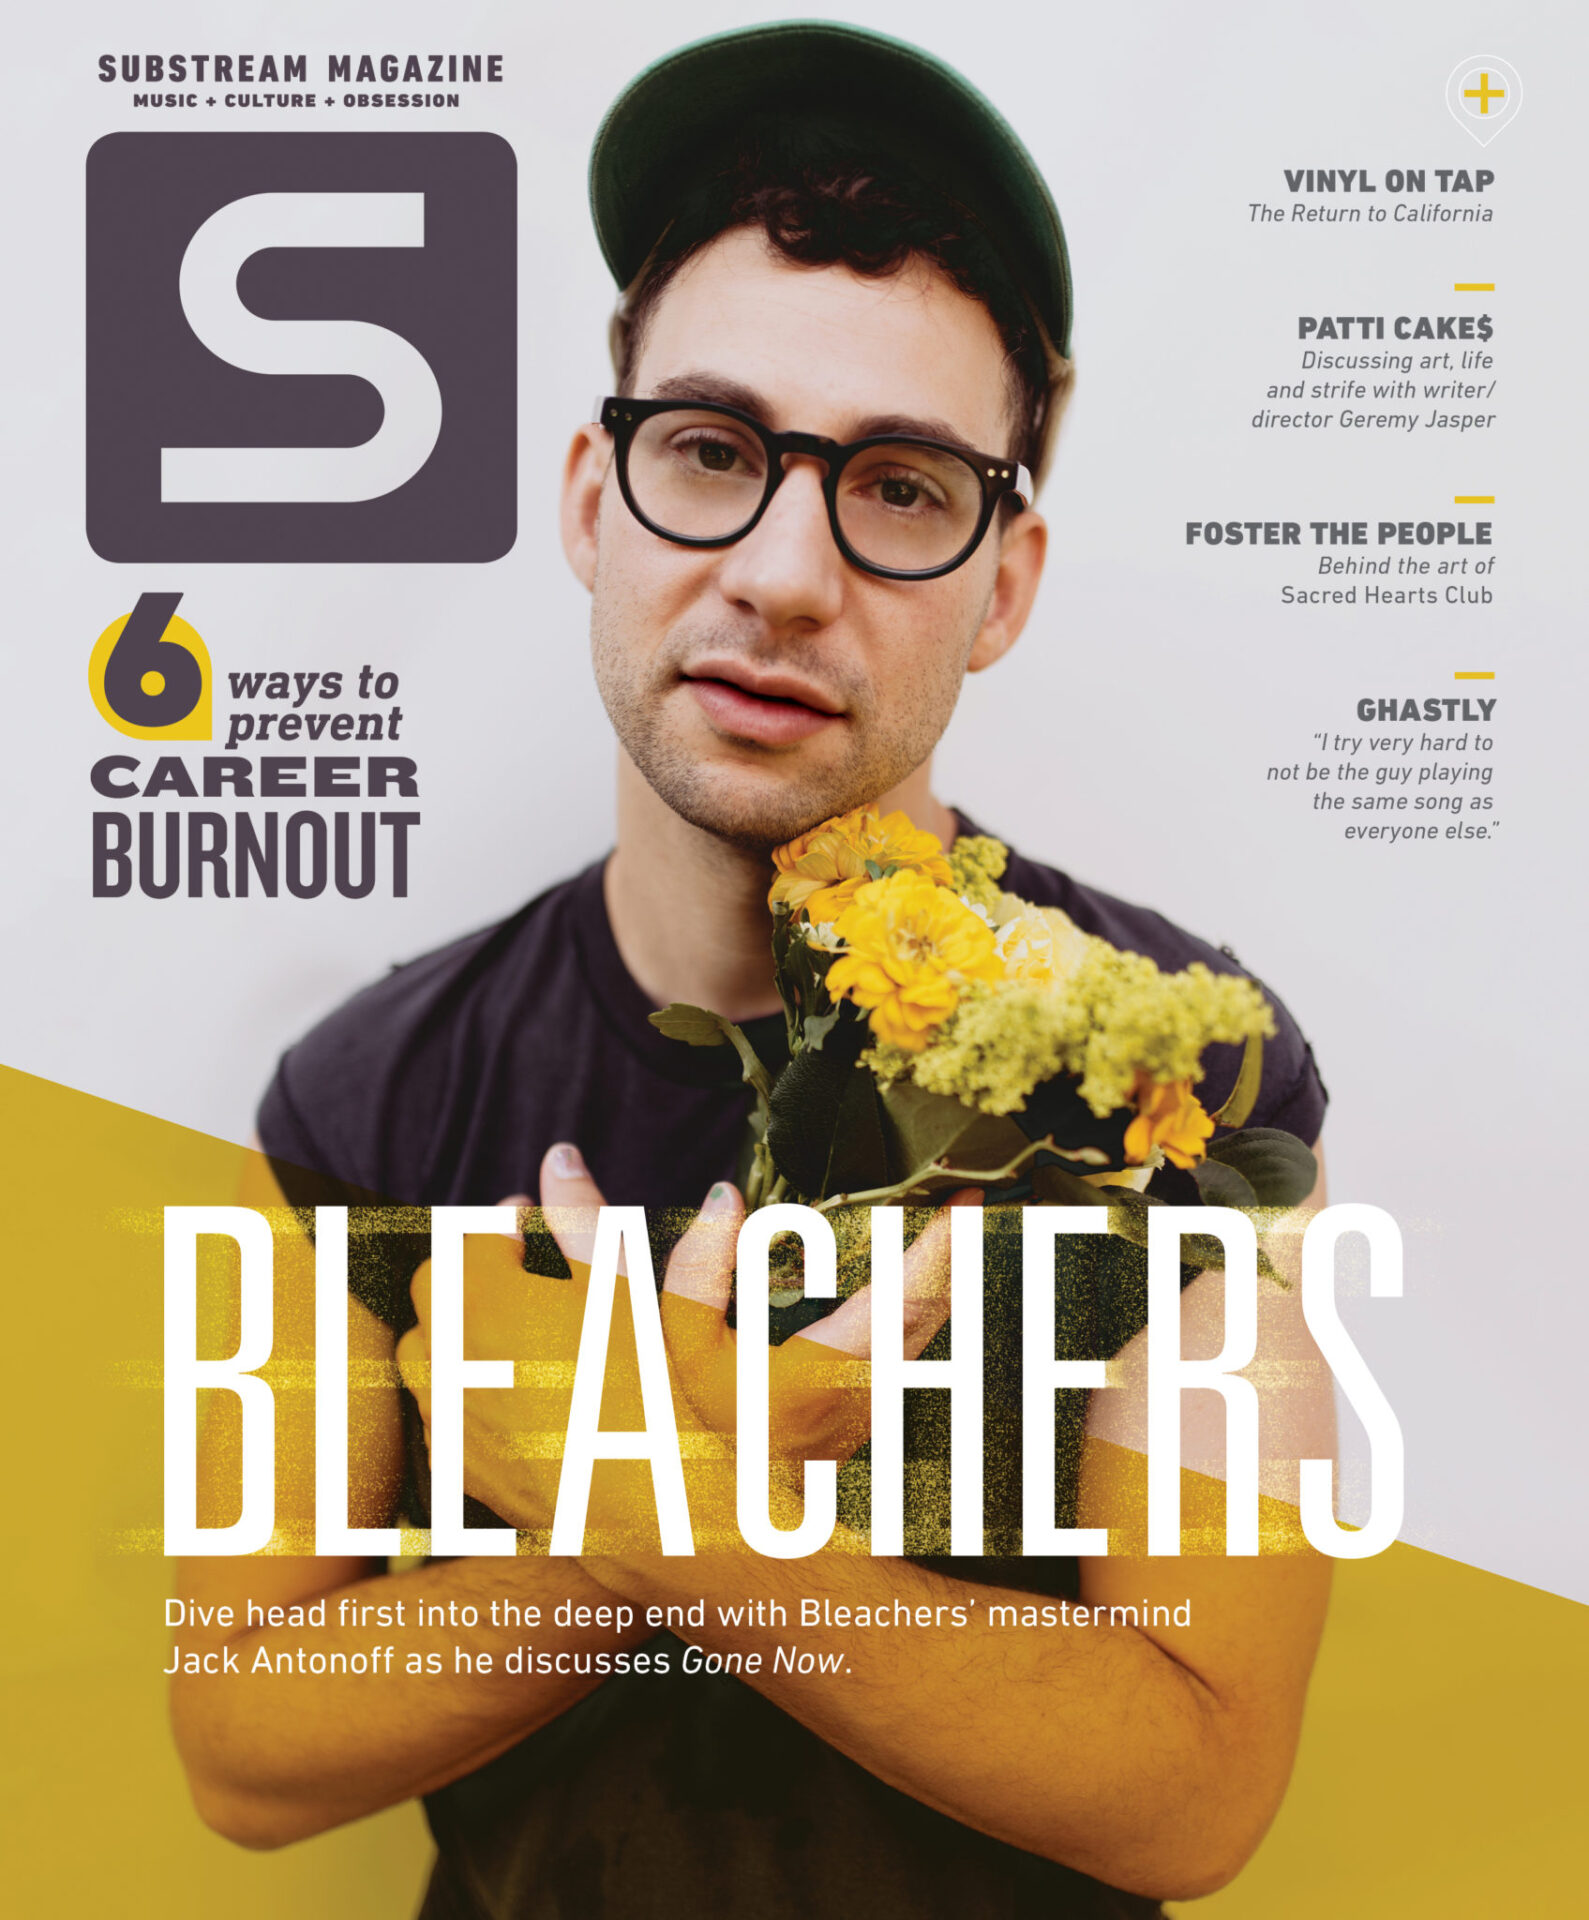 Substream #58 starring Bleachers, Foster The People, Ghastly + more